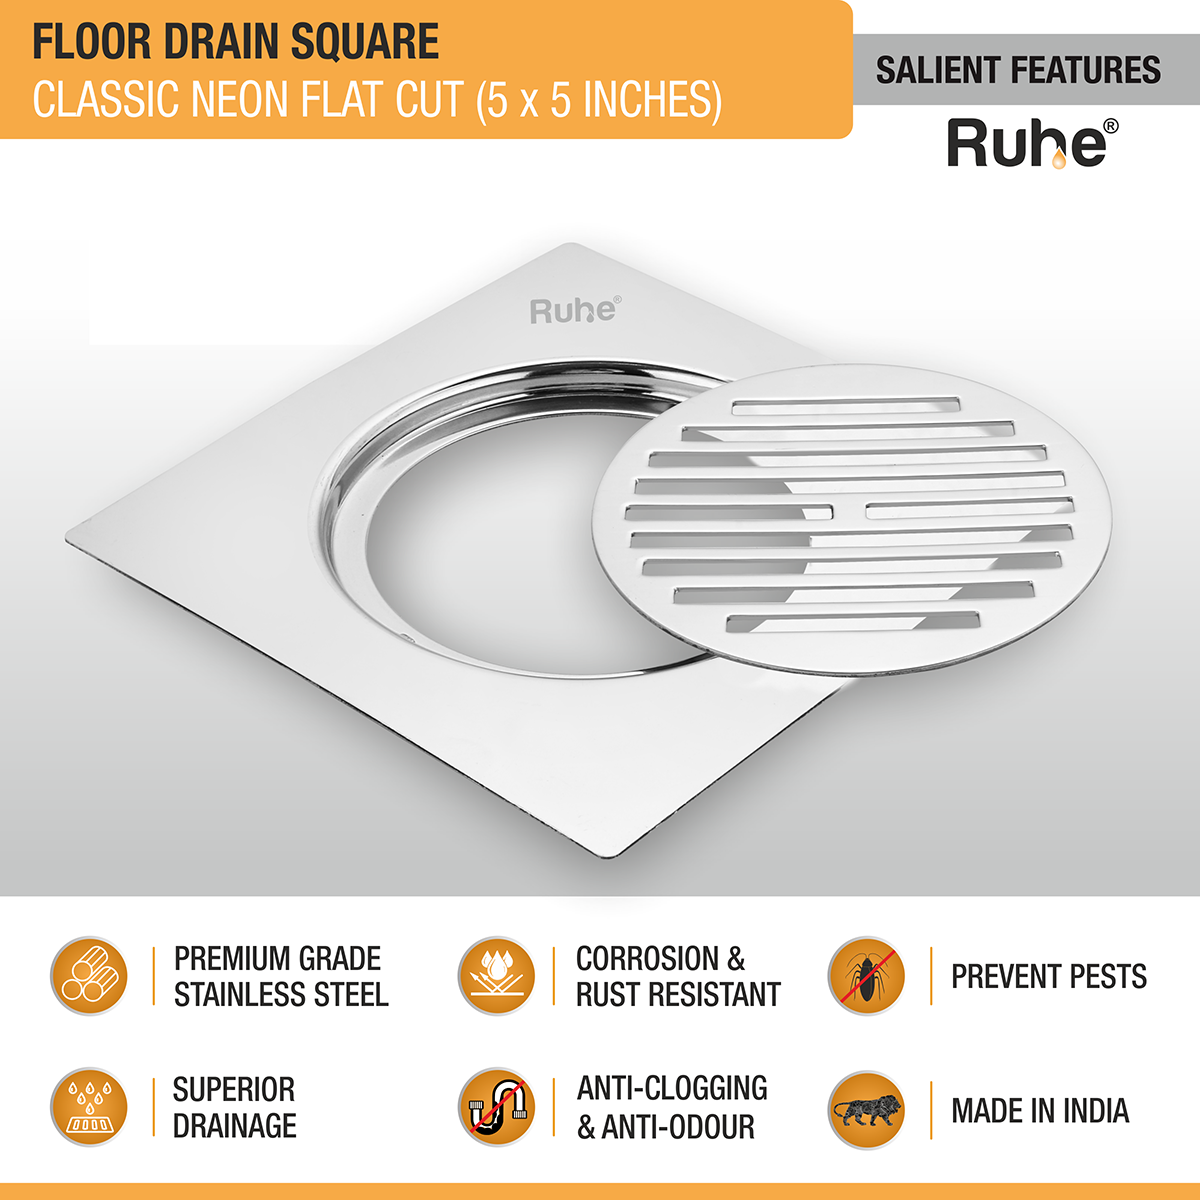 Classic Neon Square Flat Cut Floor Drain (5 x 5 inches) features